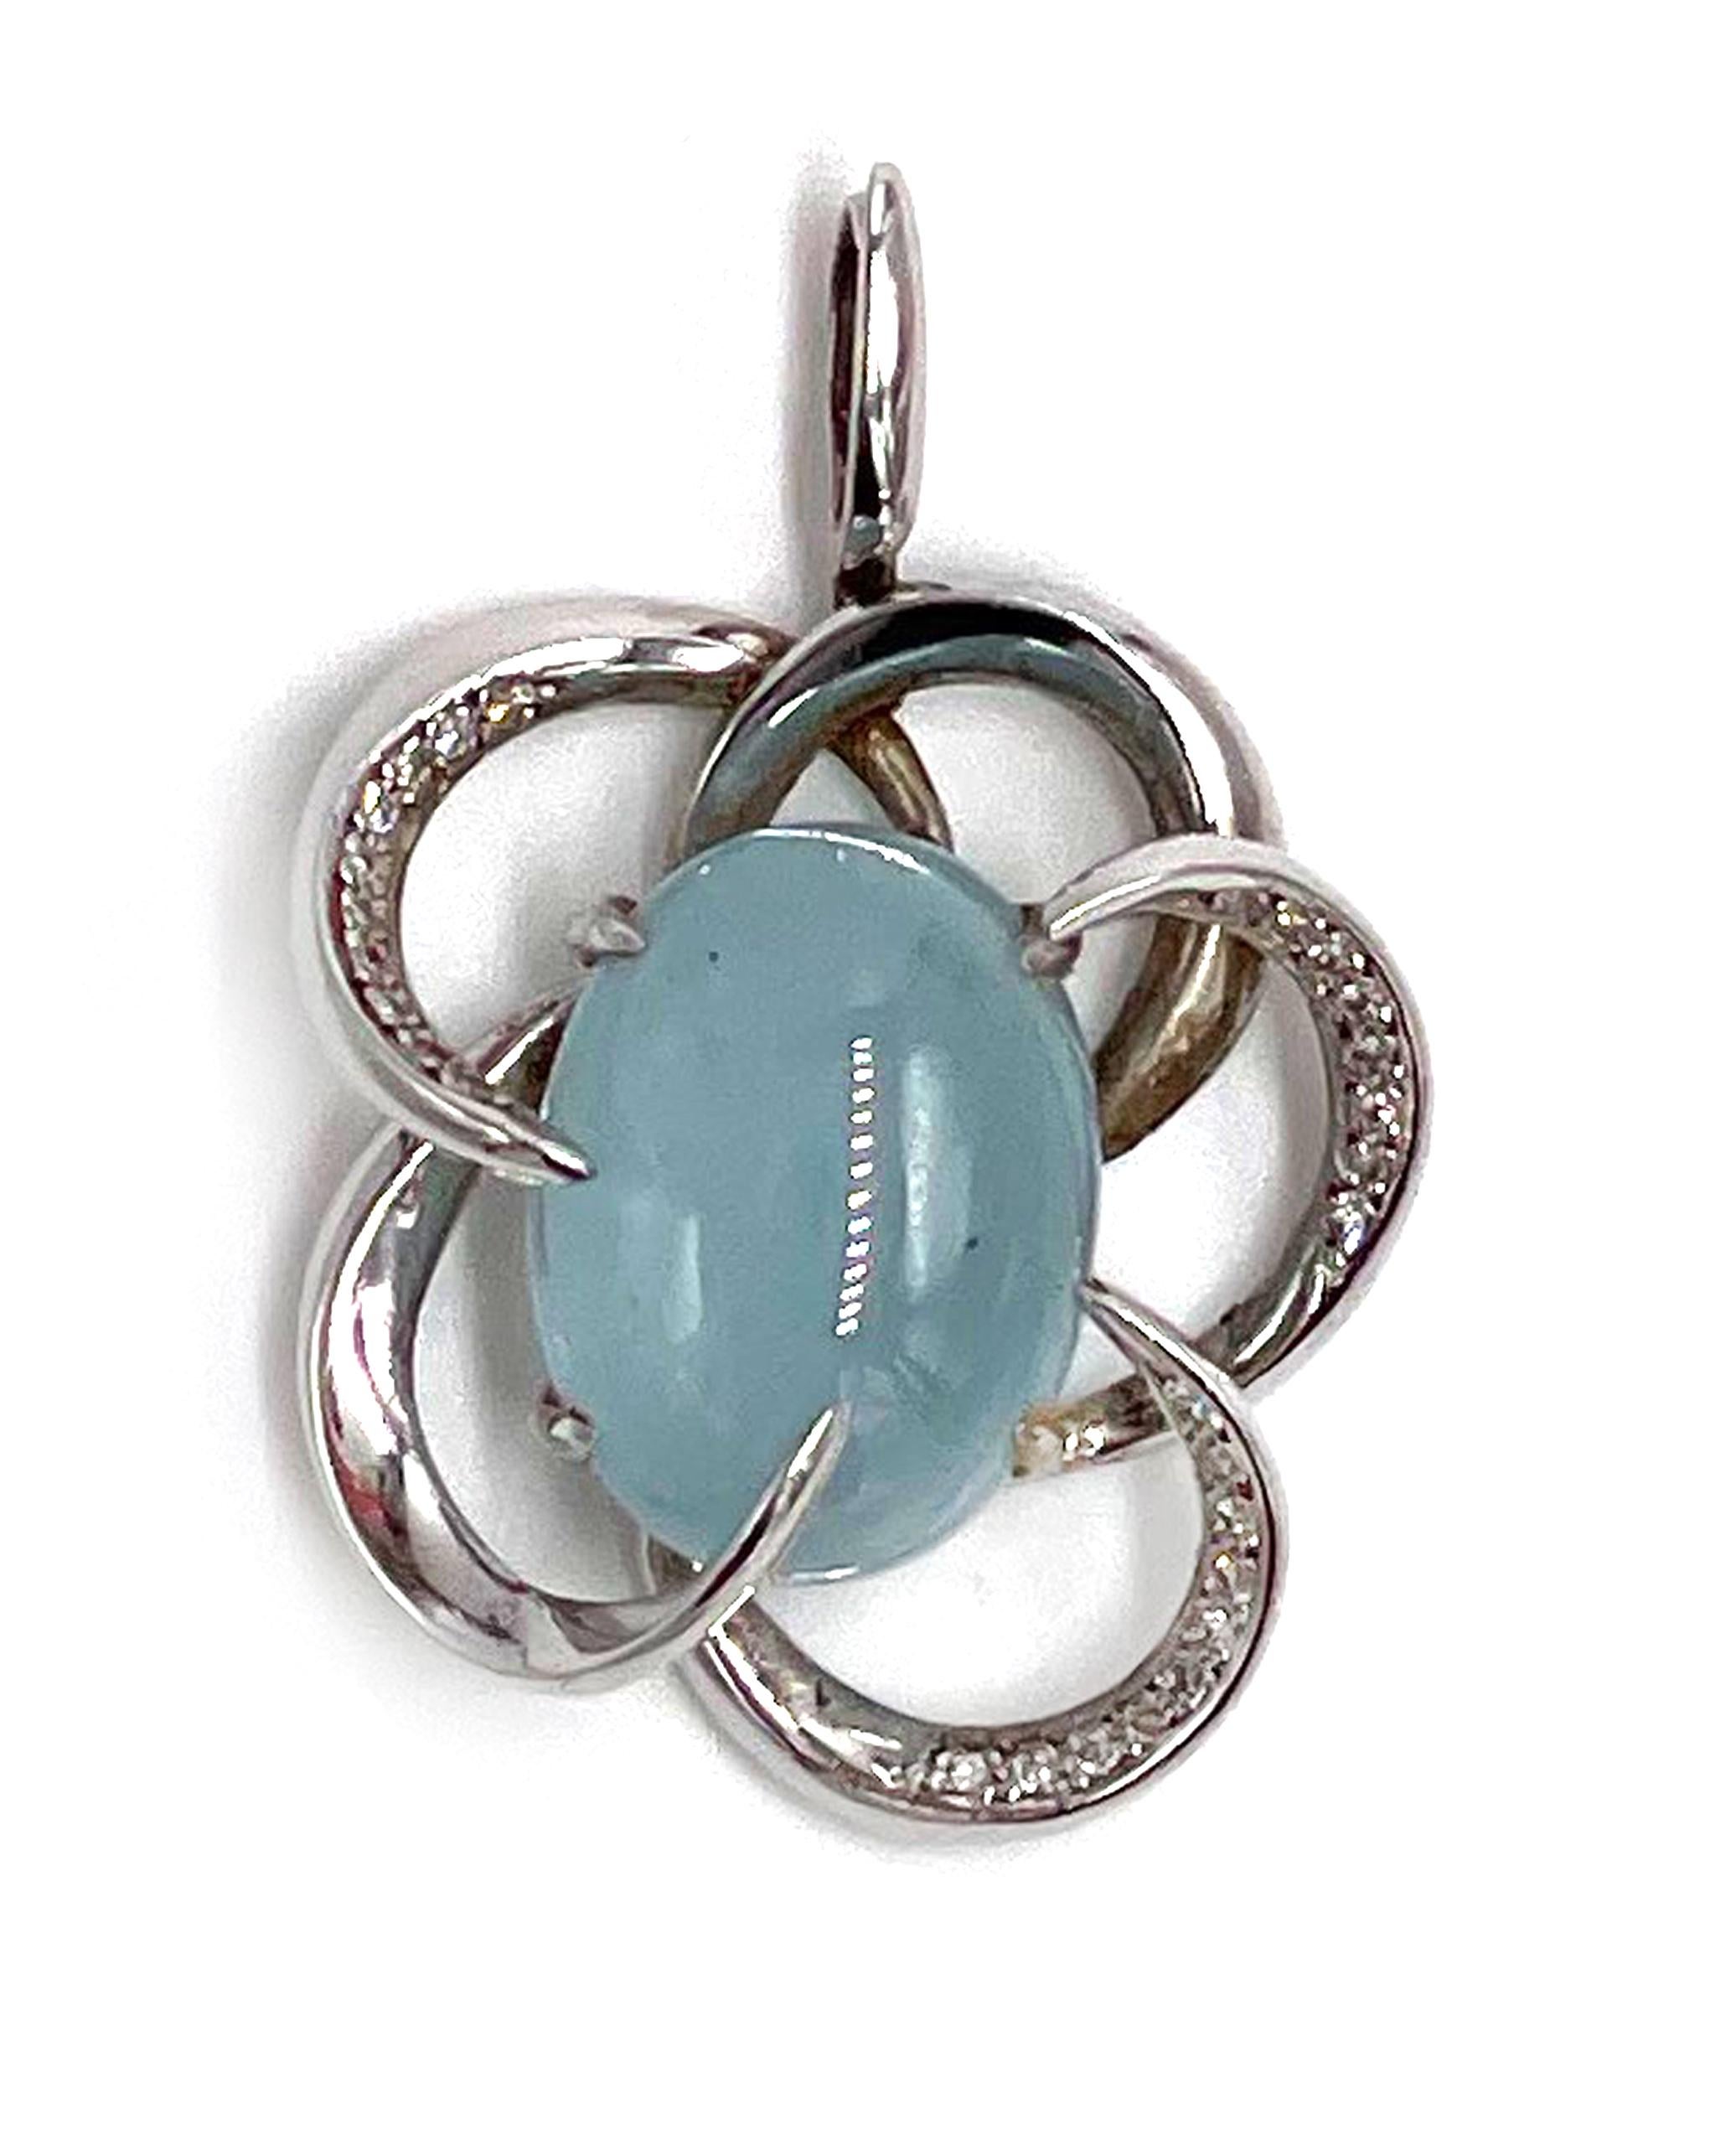 Pre owned vintage estate 18K white gold pendant by Ilias Lalaounis.  The center is set with a 16.22 carat oval cabochon cut milky aquamarine.  The stone has a blue hue, medium tone and vs clarity.  Set on three loops are a total of 28 single cut